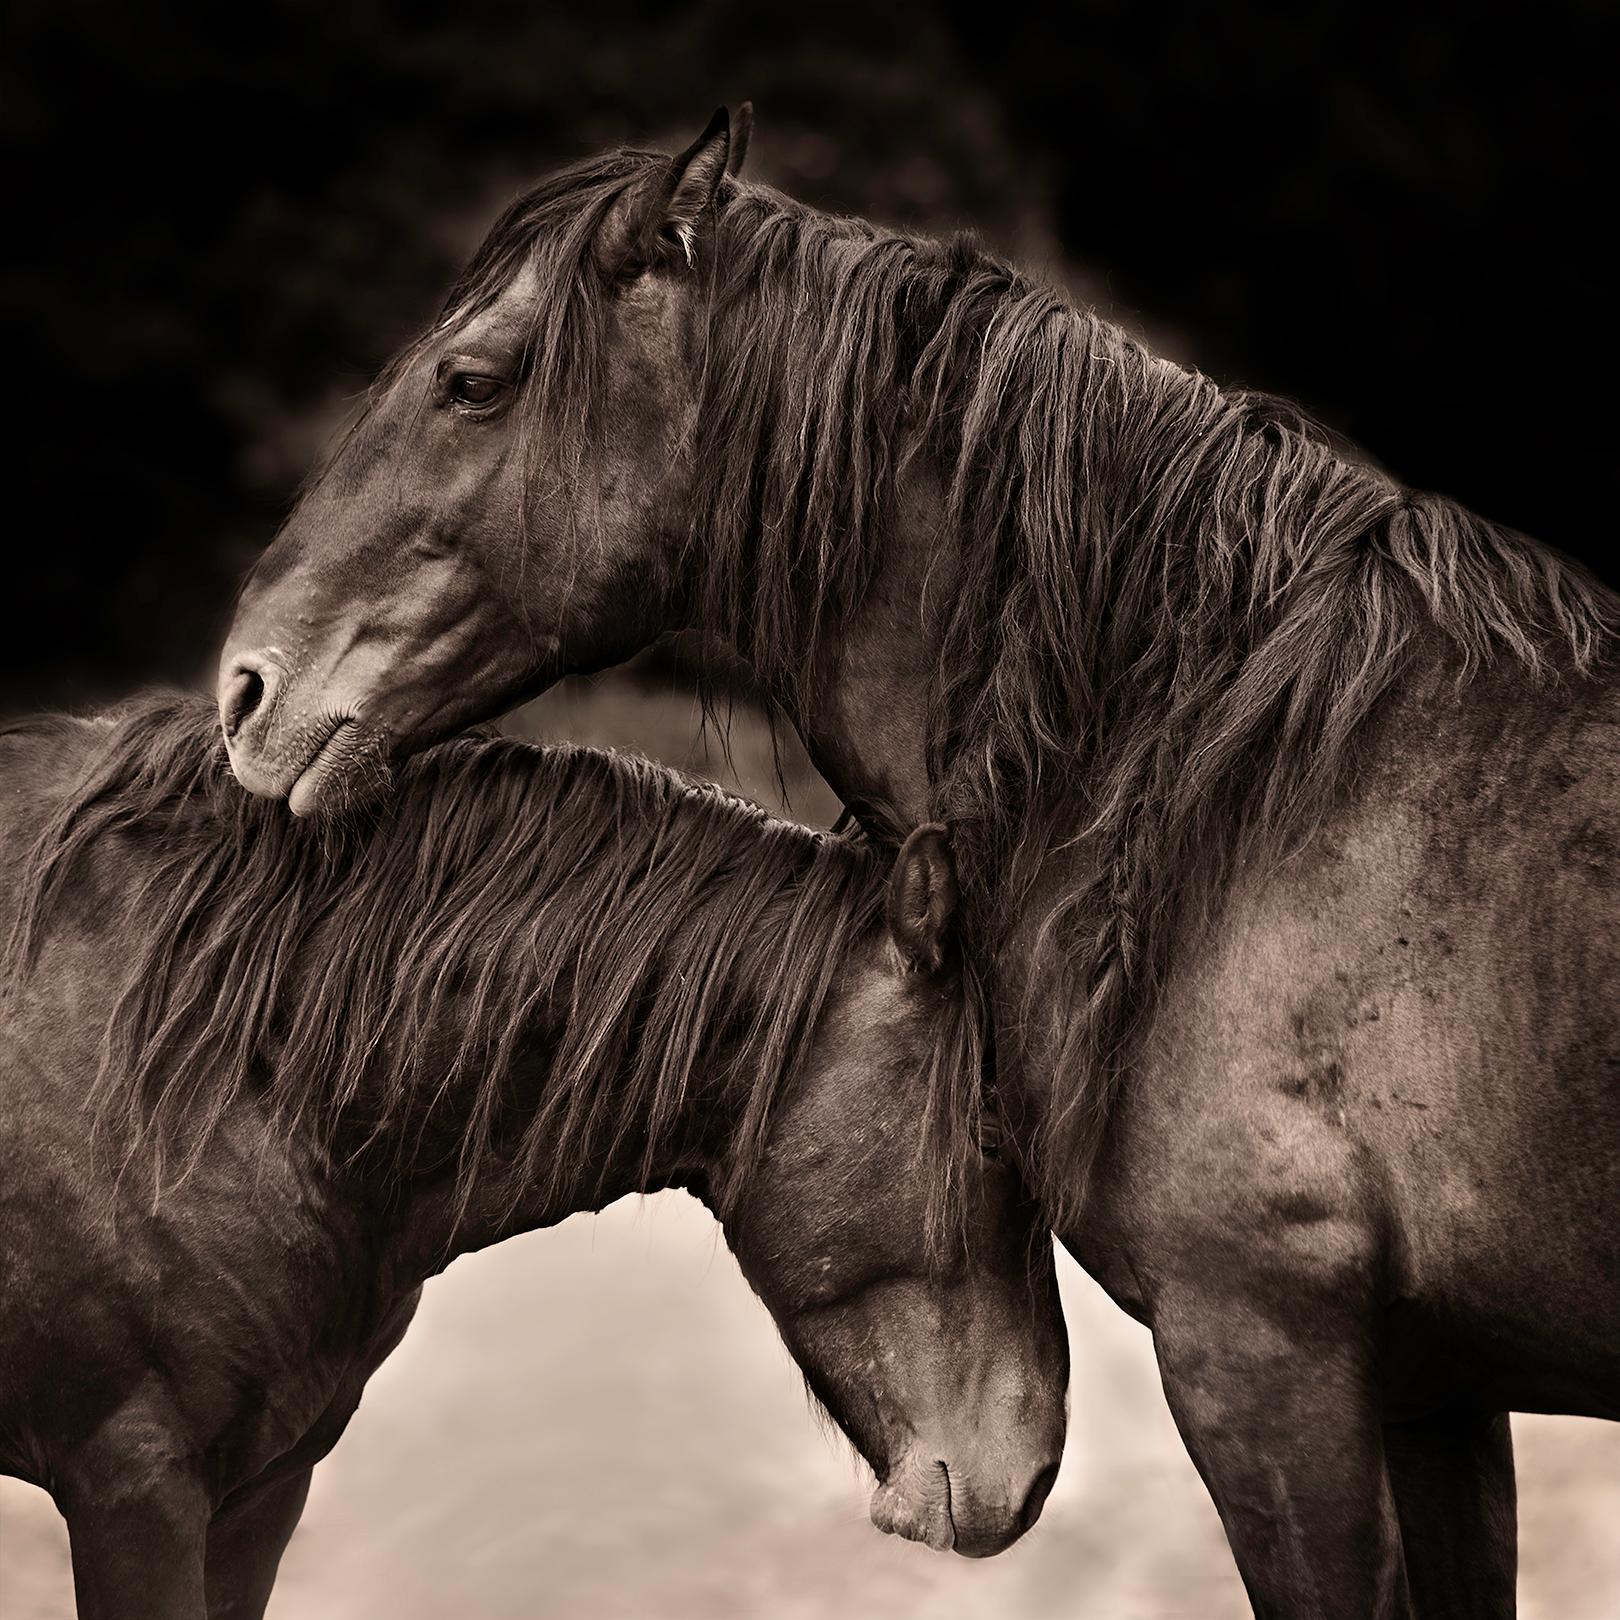 This black and white contemporary photograph by Tori Gagne captures a close-up view of two wild horses embracing. An edition size of 25, this photograph is available as a metal sublimation print with a 1.3” deep silver flush mount frame and white